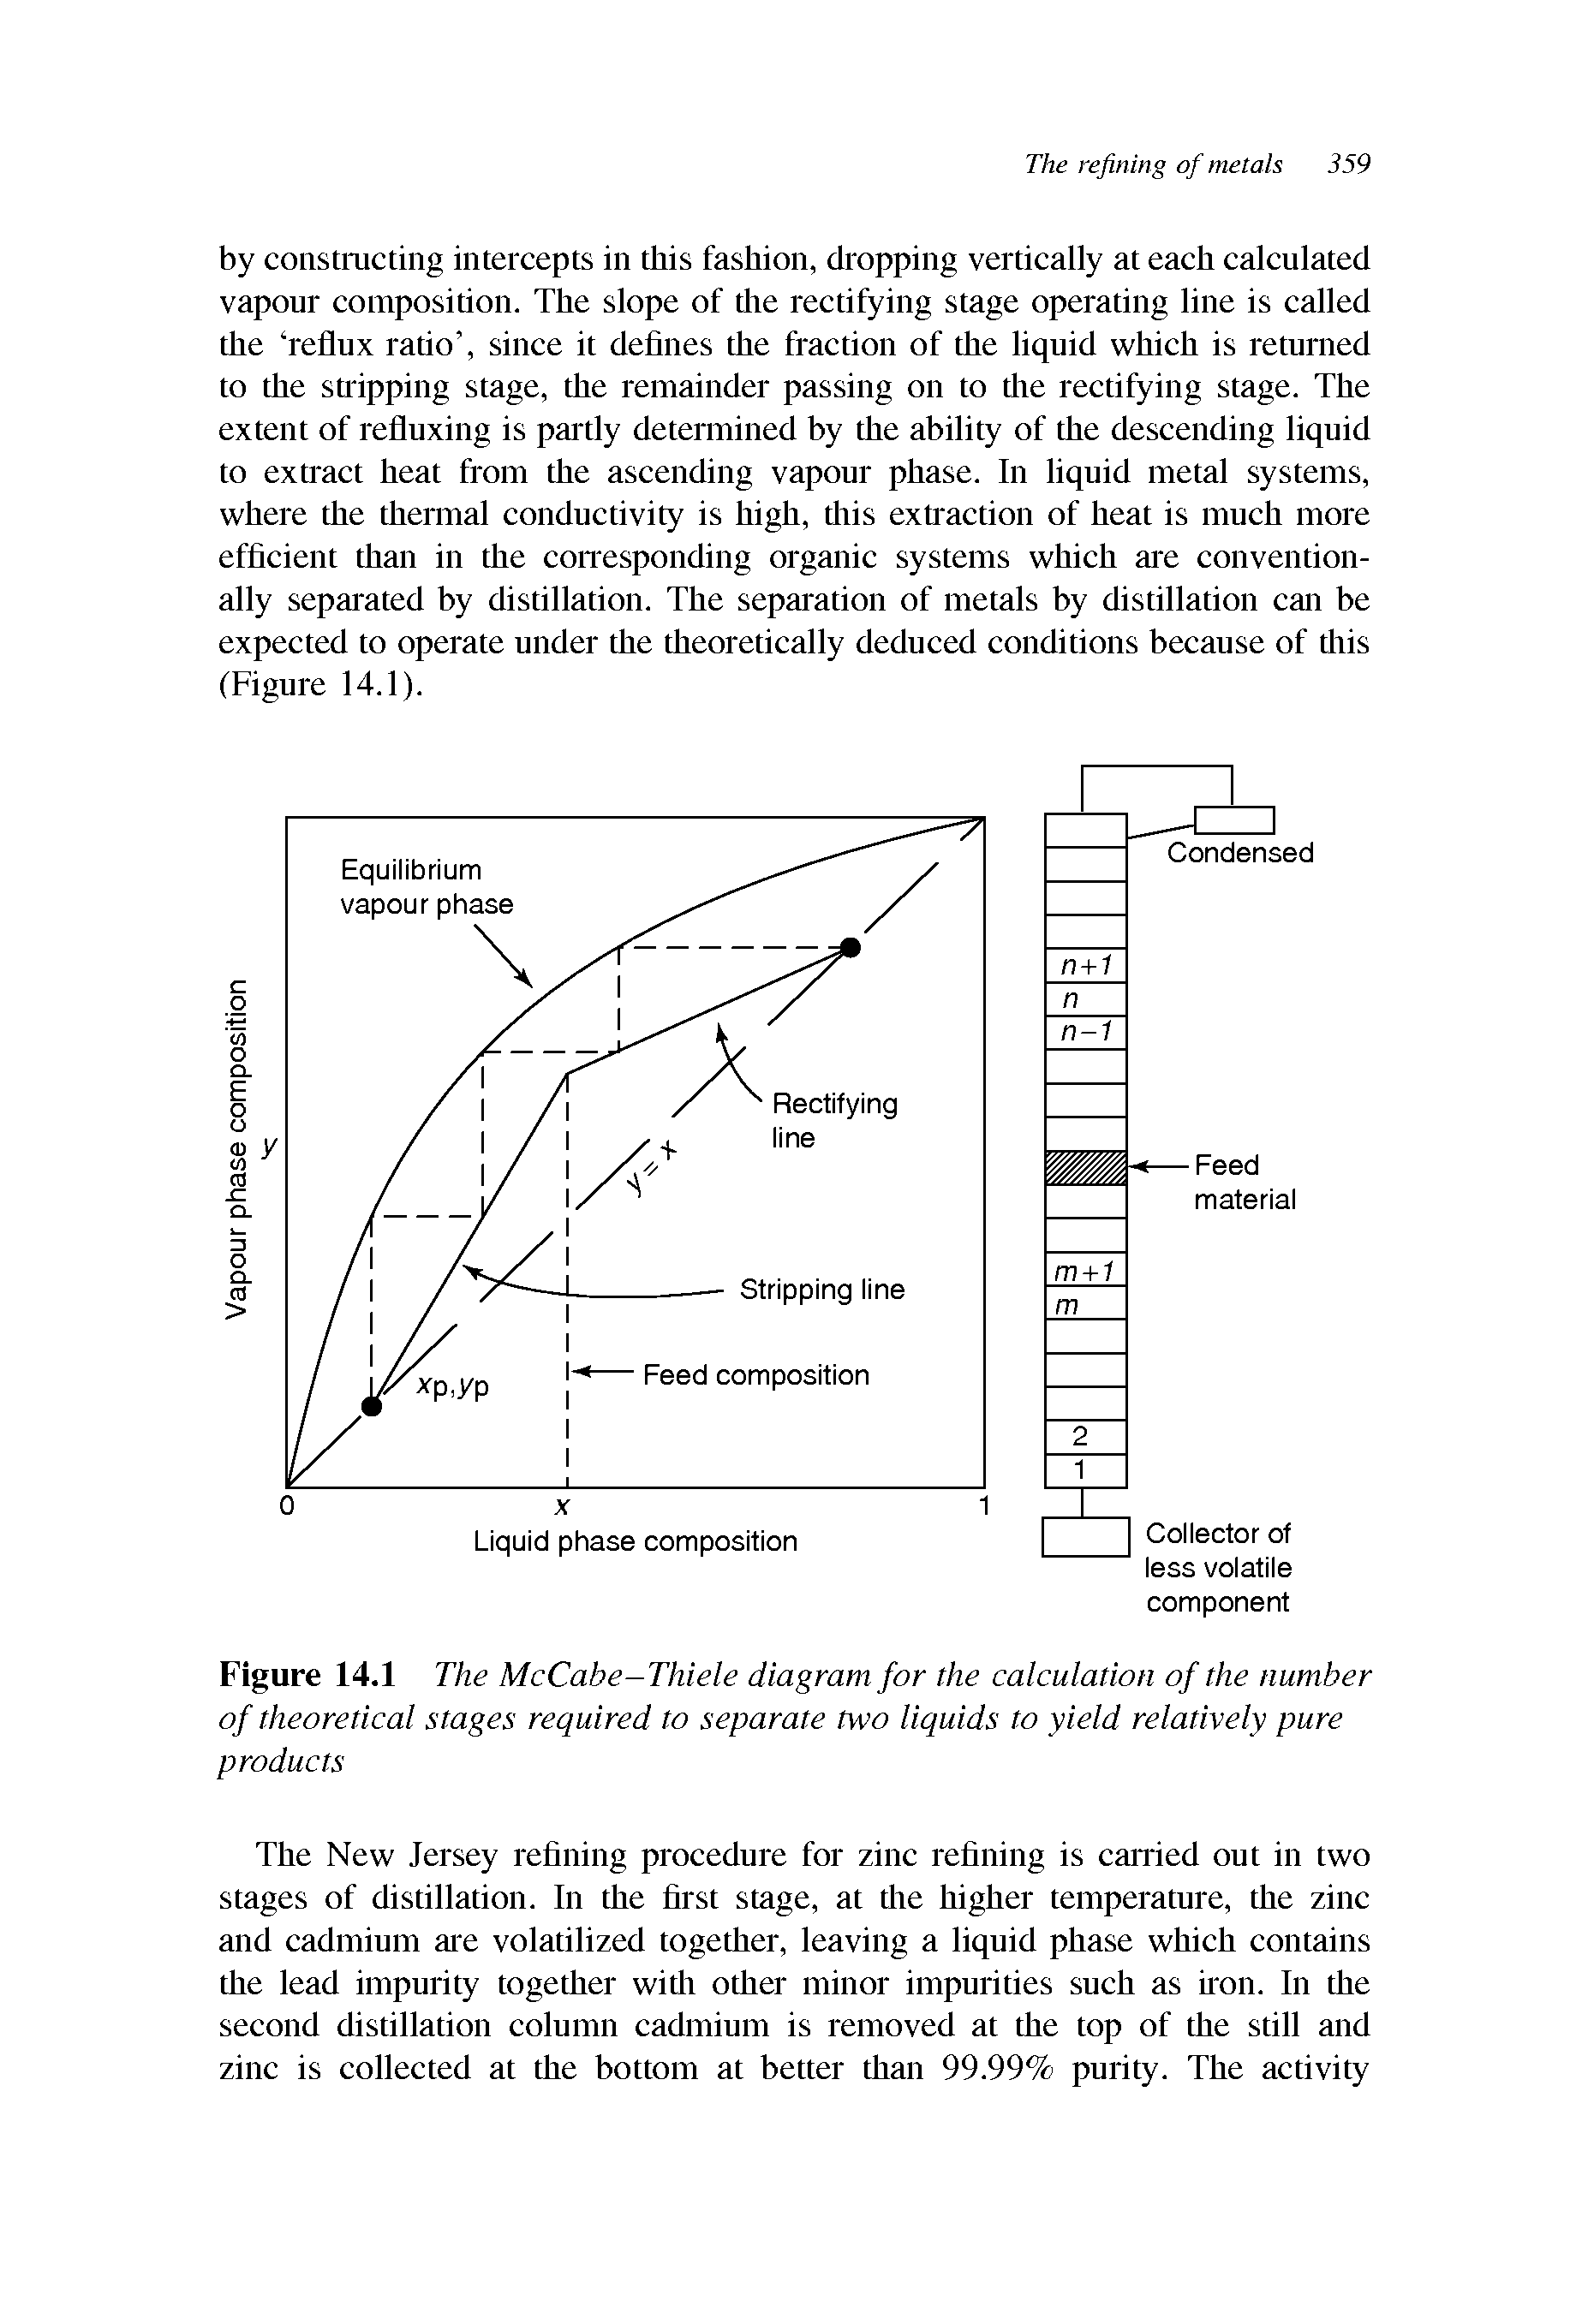 Figure 14.1 The McCabe-Thiele diagram for the calculation of the number of theoretical stages required to separate two liquids to yield relatively pure products...